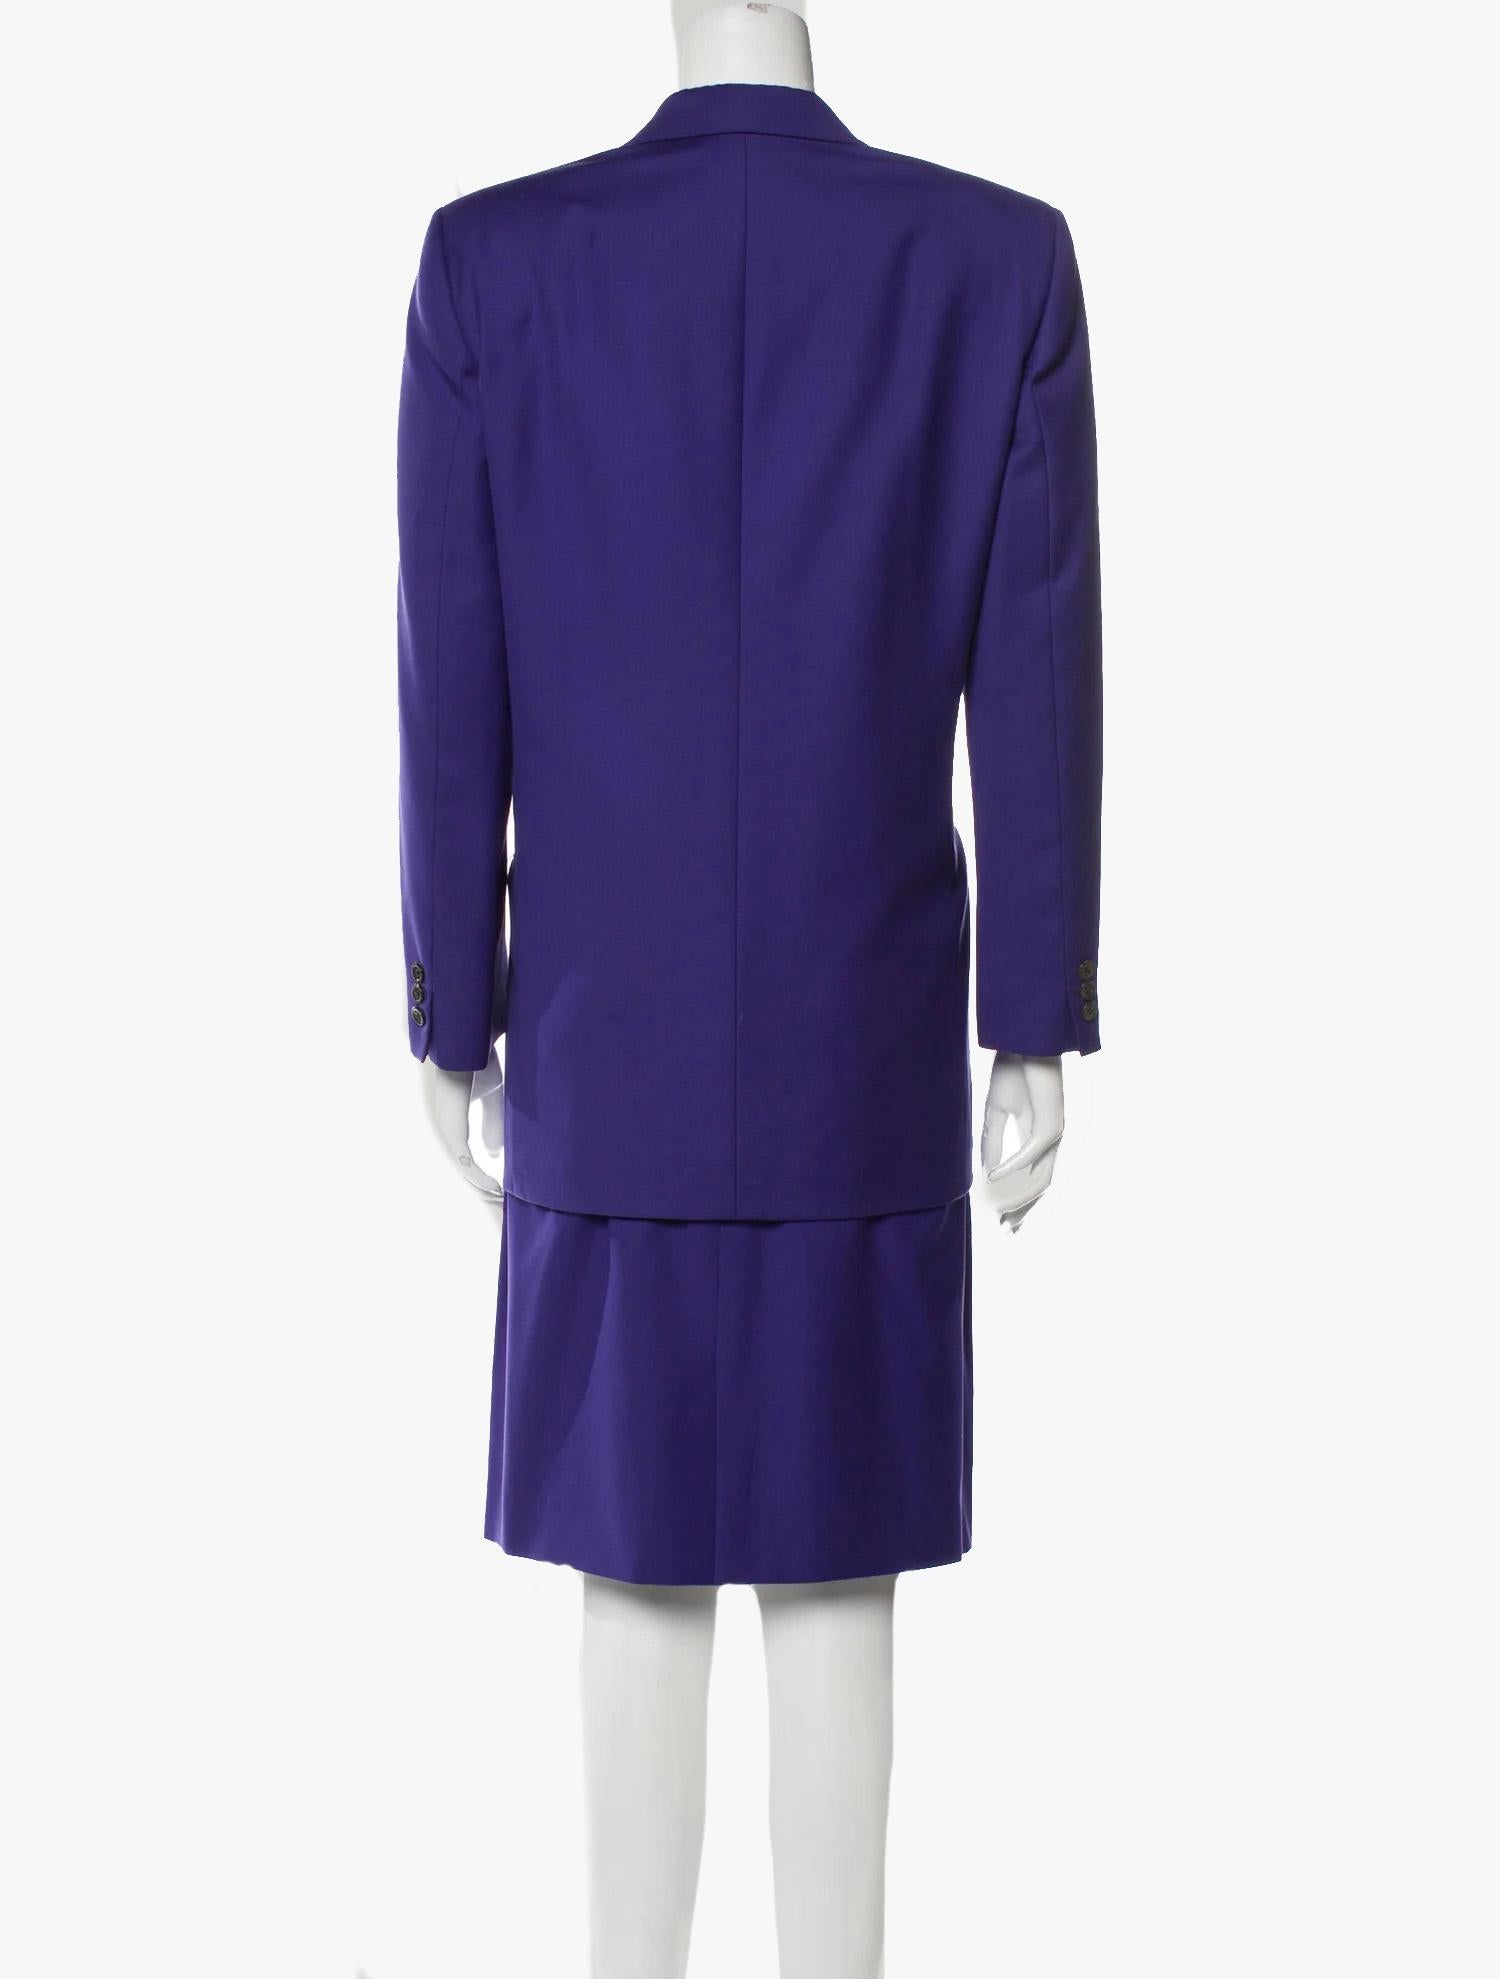 Burberry Wool Skirt Suit, 1990s In Excellent Condition For Sale In New York, NY